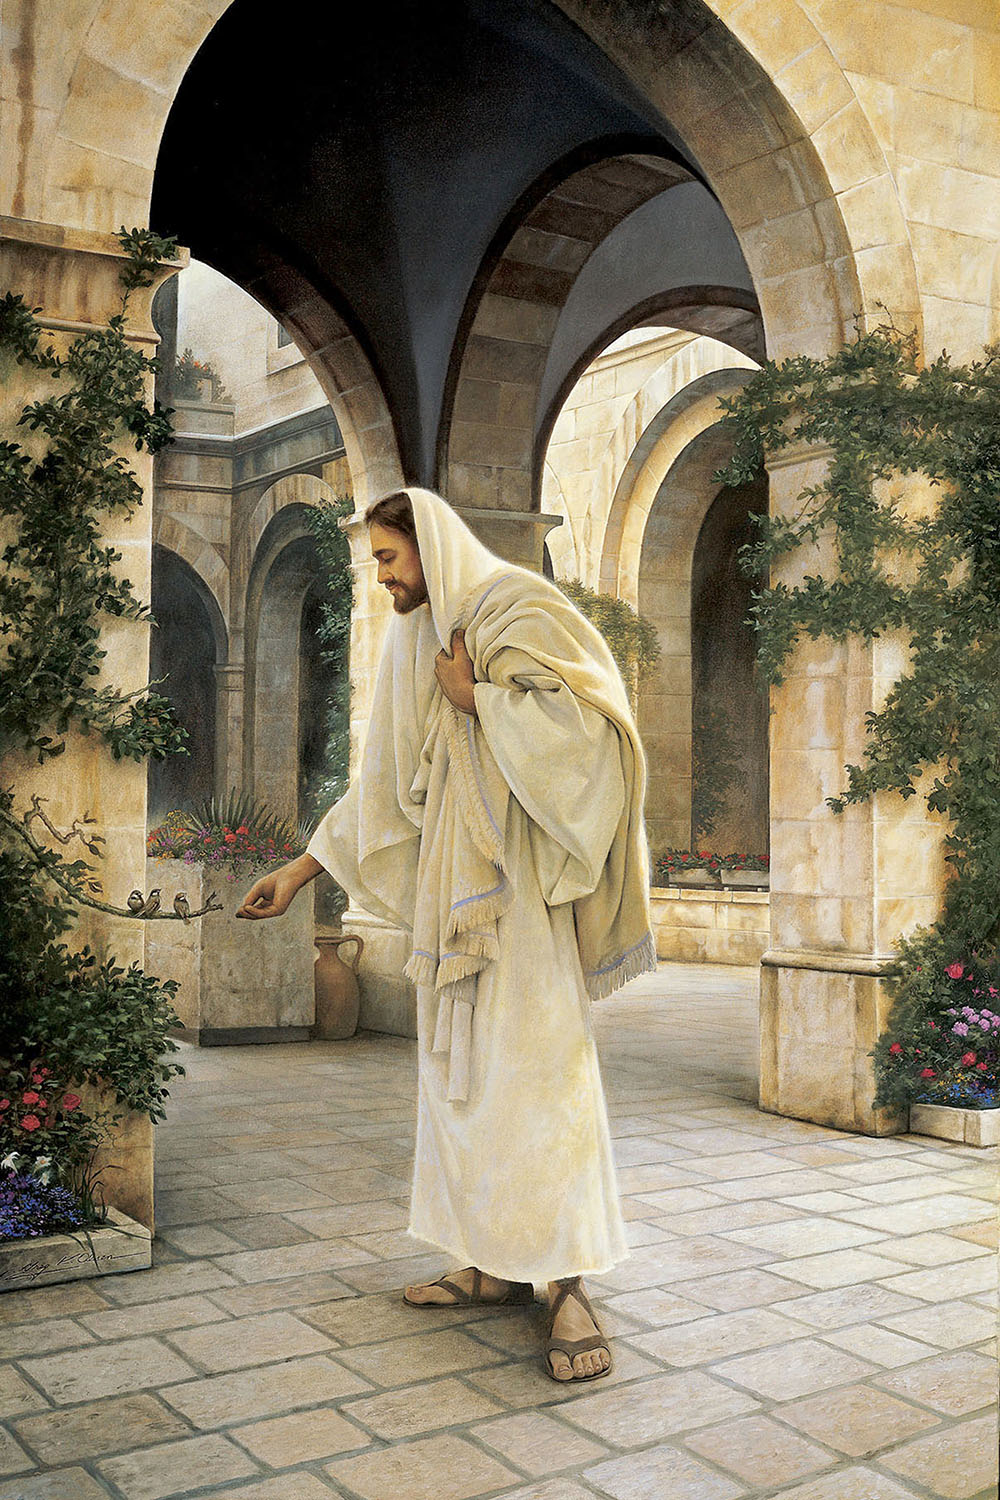 In His Constant Care by Greg Olsen